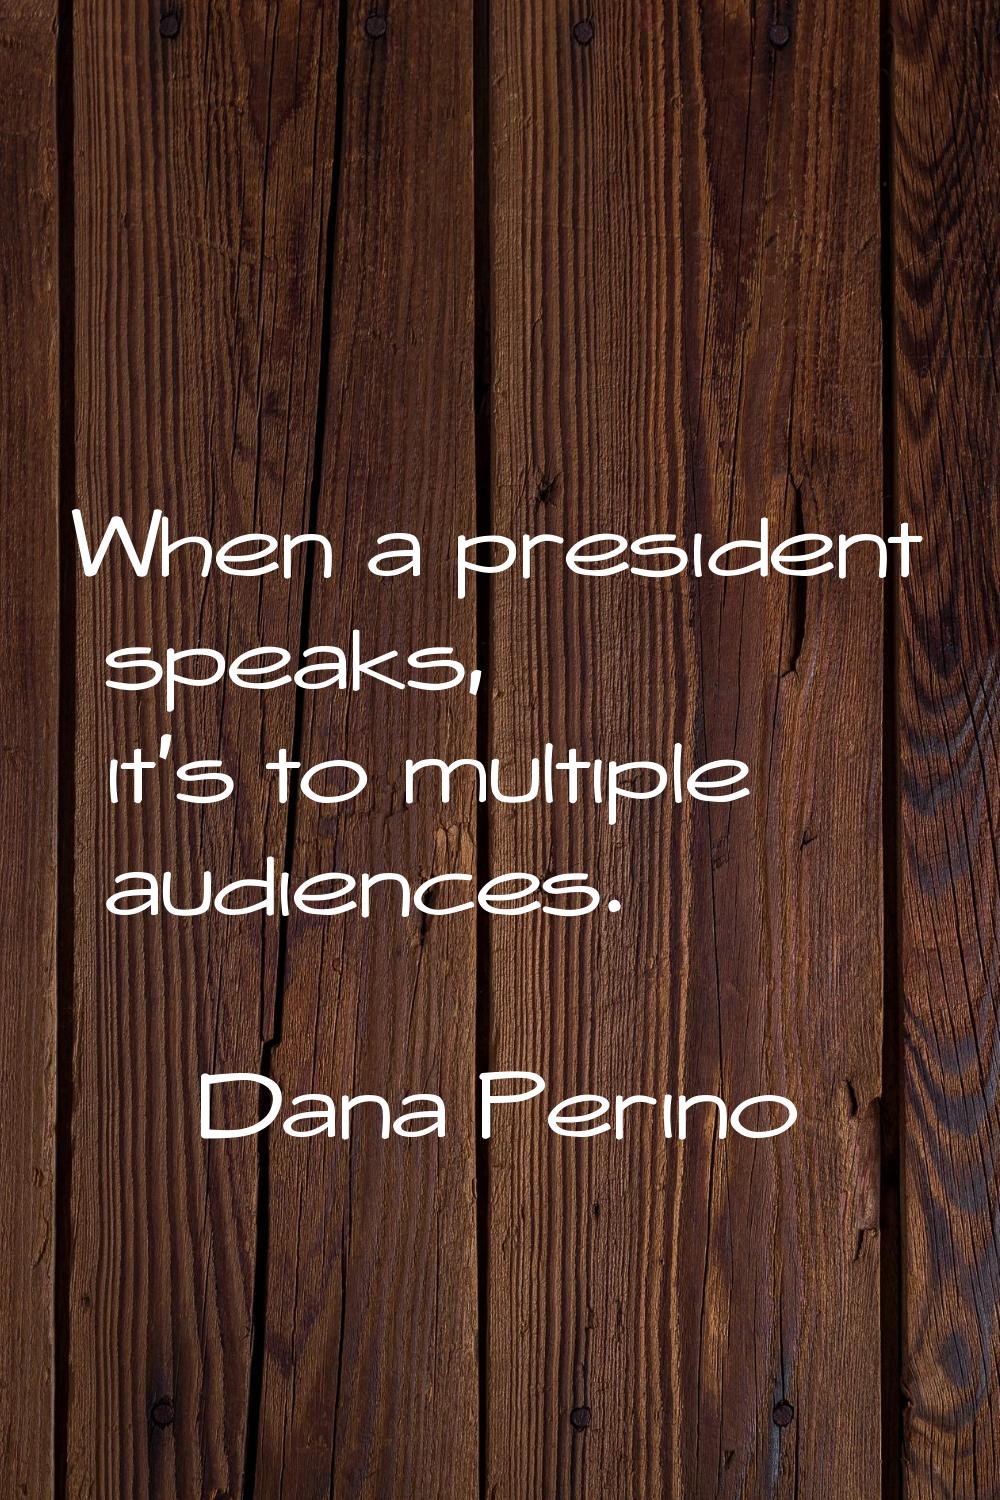 When a president speaks, it's to multiple audiences.